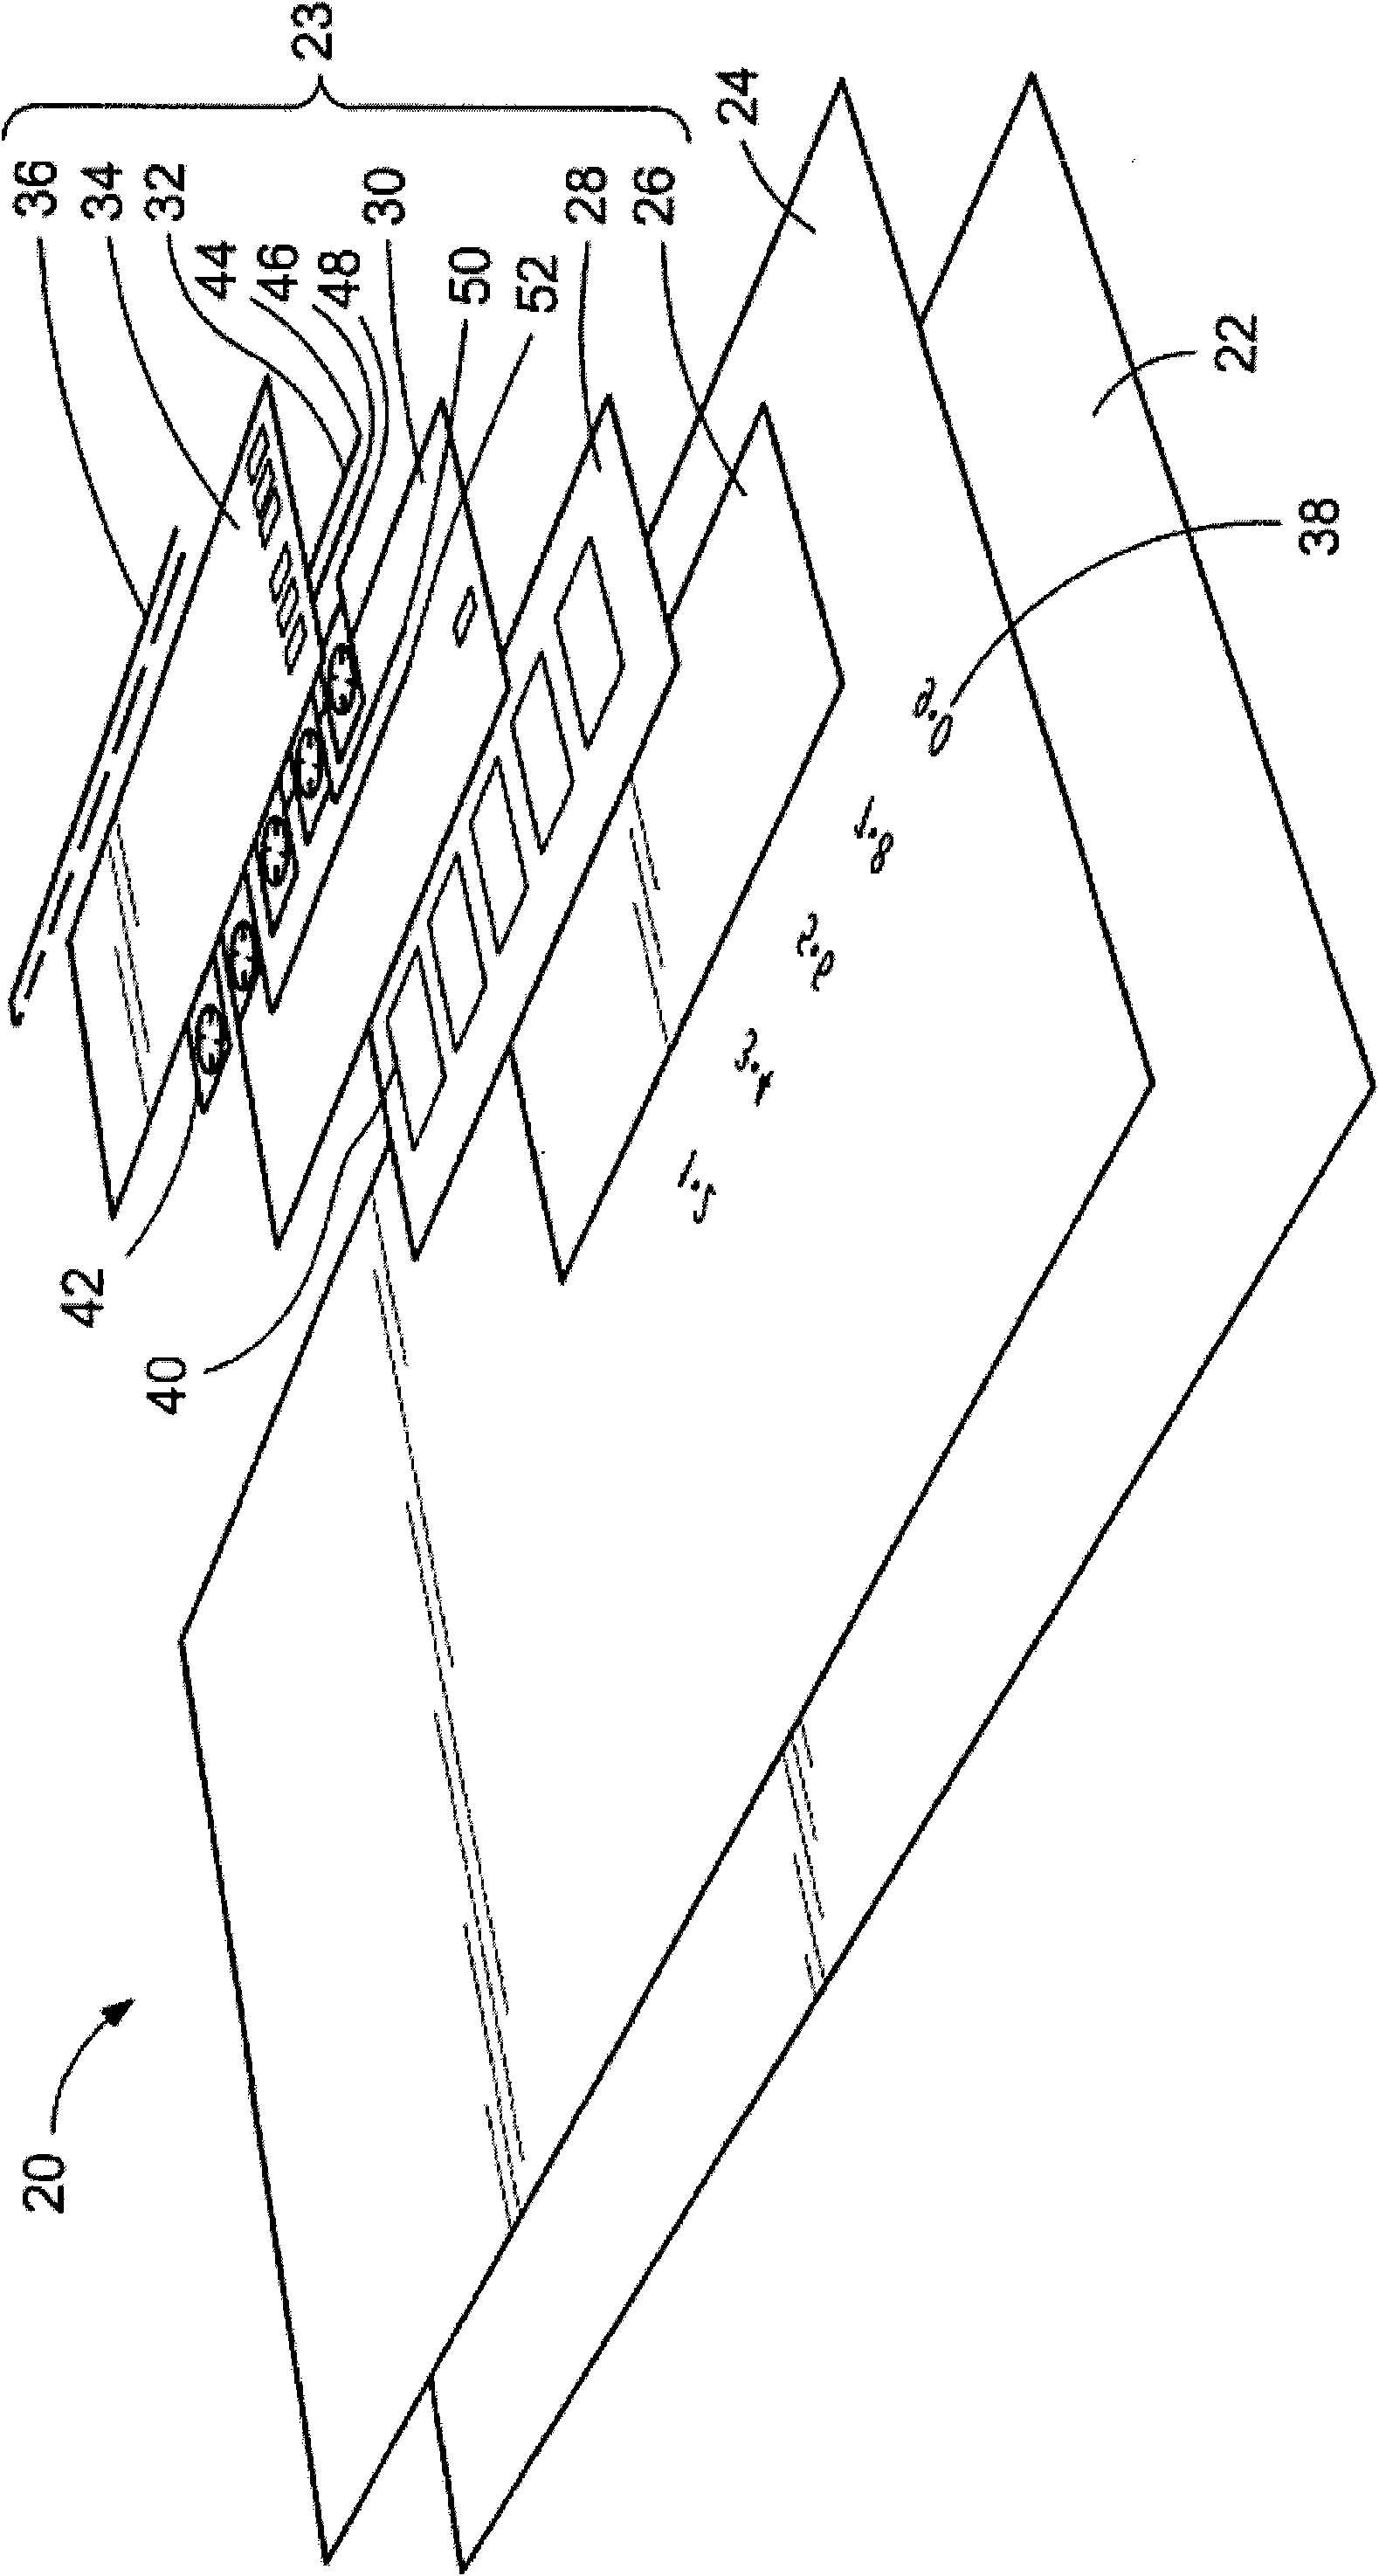 In-molded capacitive switch